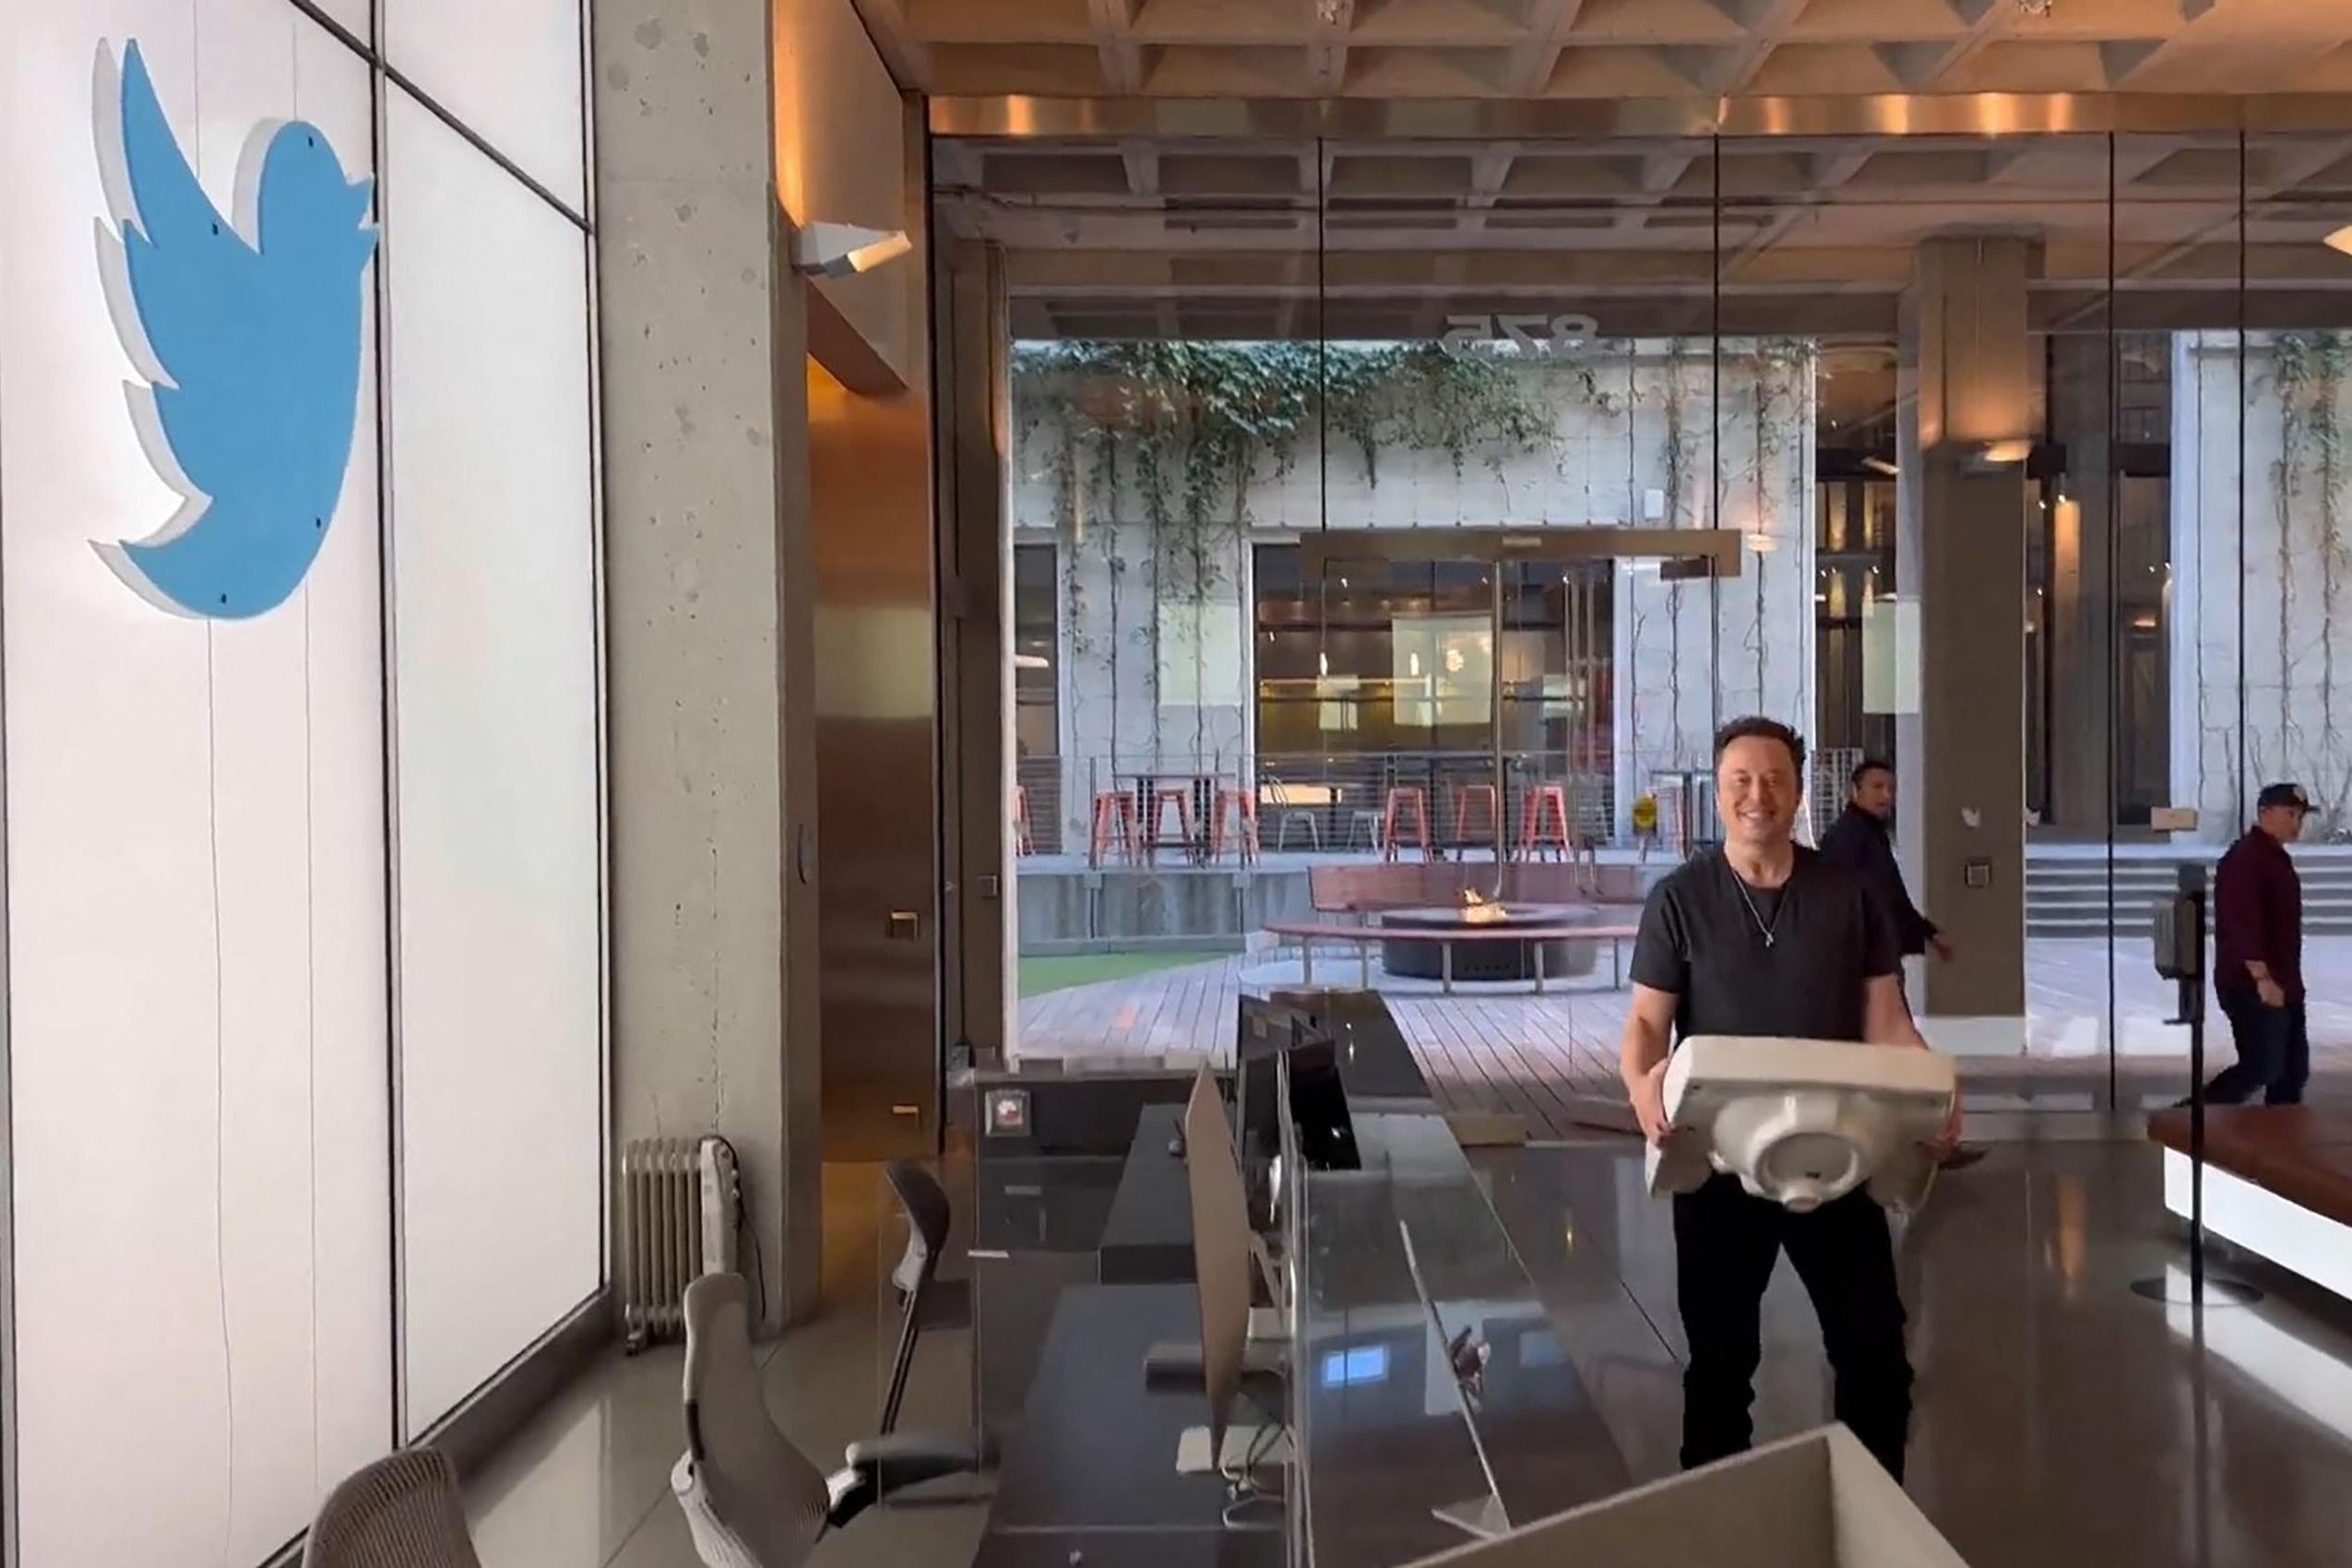 Elon Musk in an office with a Twitter logo on the wall; he is carrying a sink. 